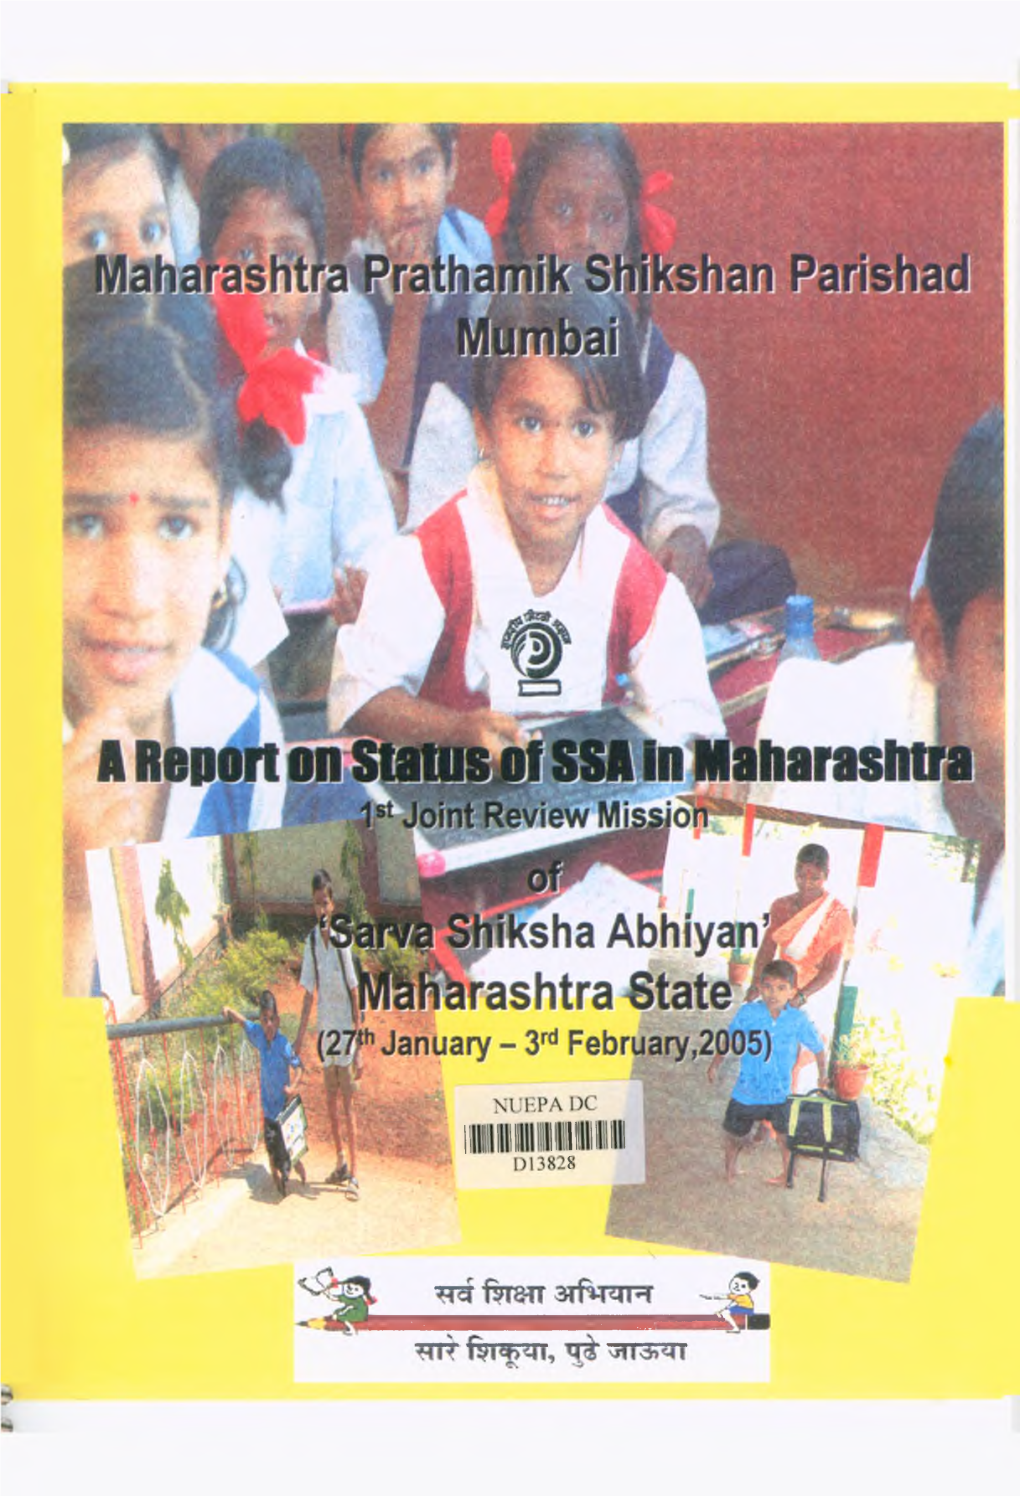 A Report on Status of Ssa in Maharashtra 1St Joint Review